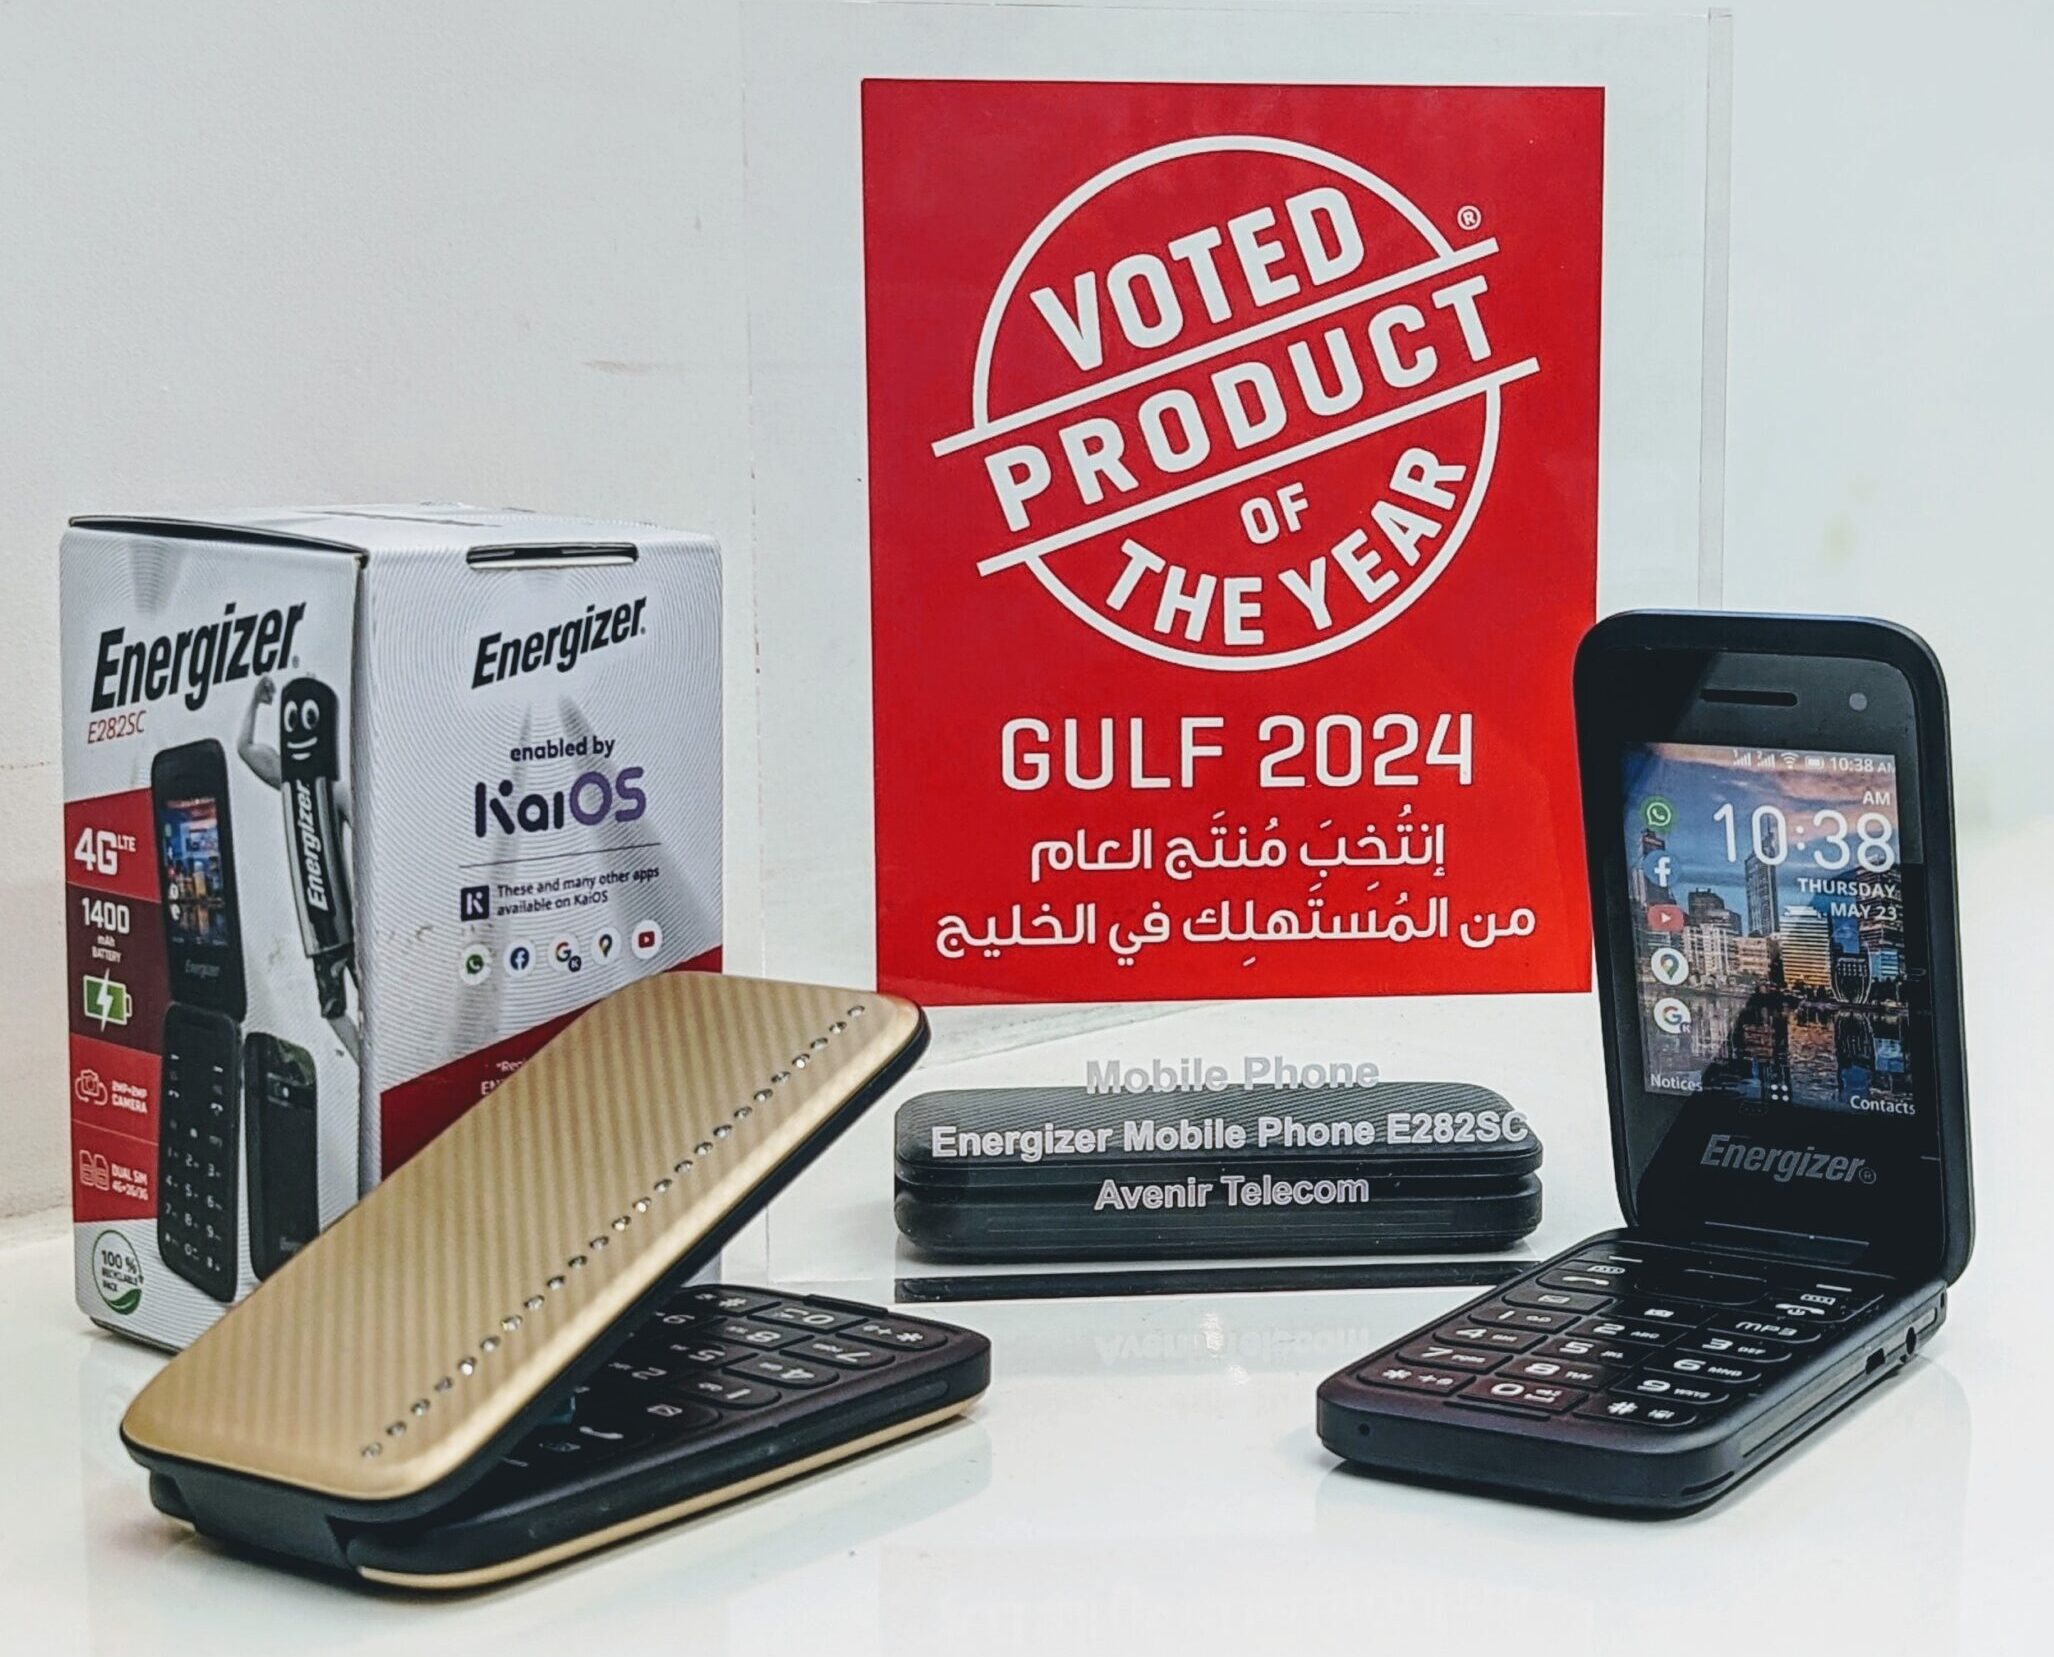 ENERGIZER E282SC, powered by KaiOS, has been voted 2024 Product Of the Year!